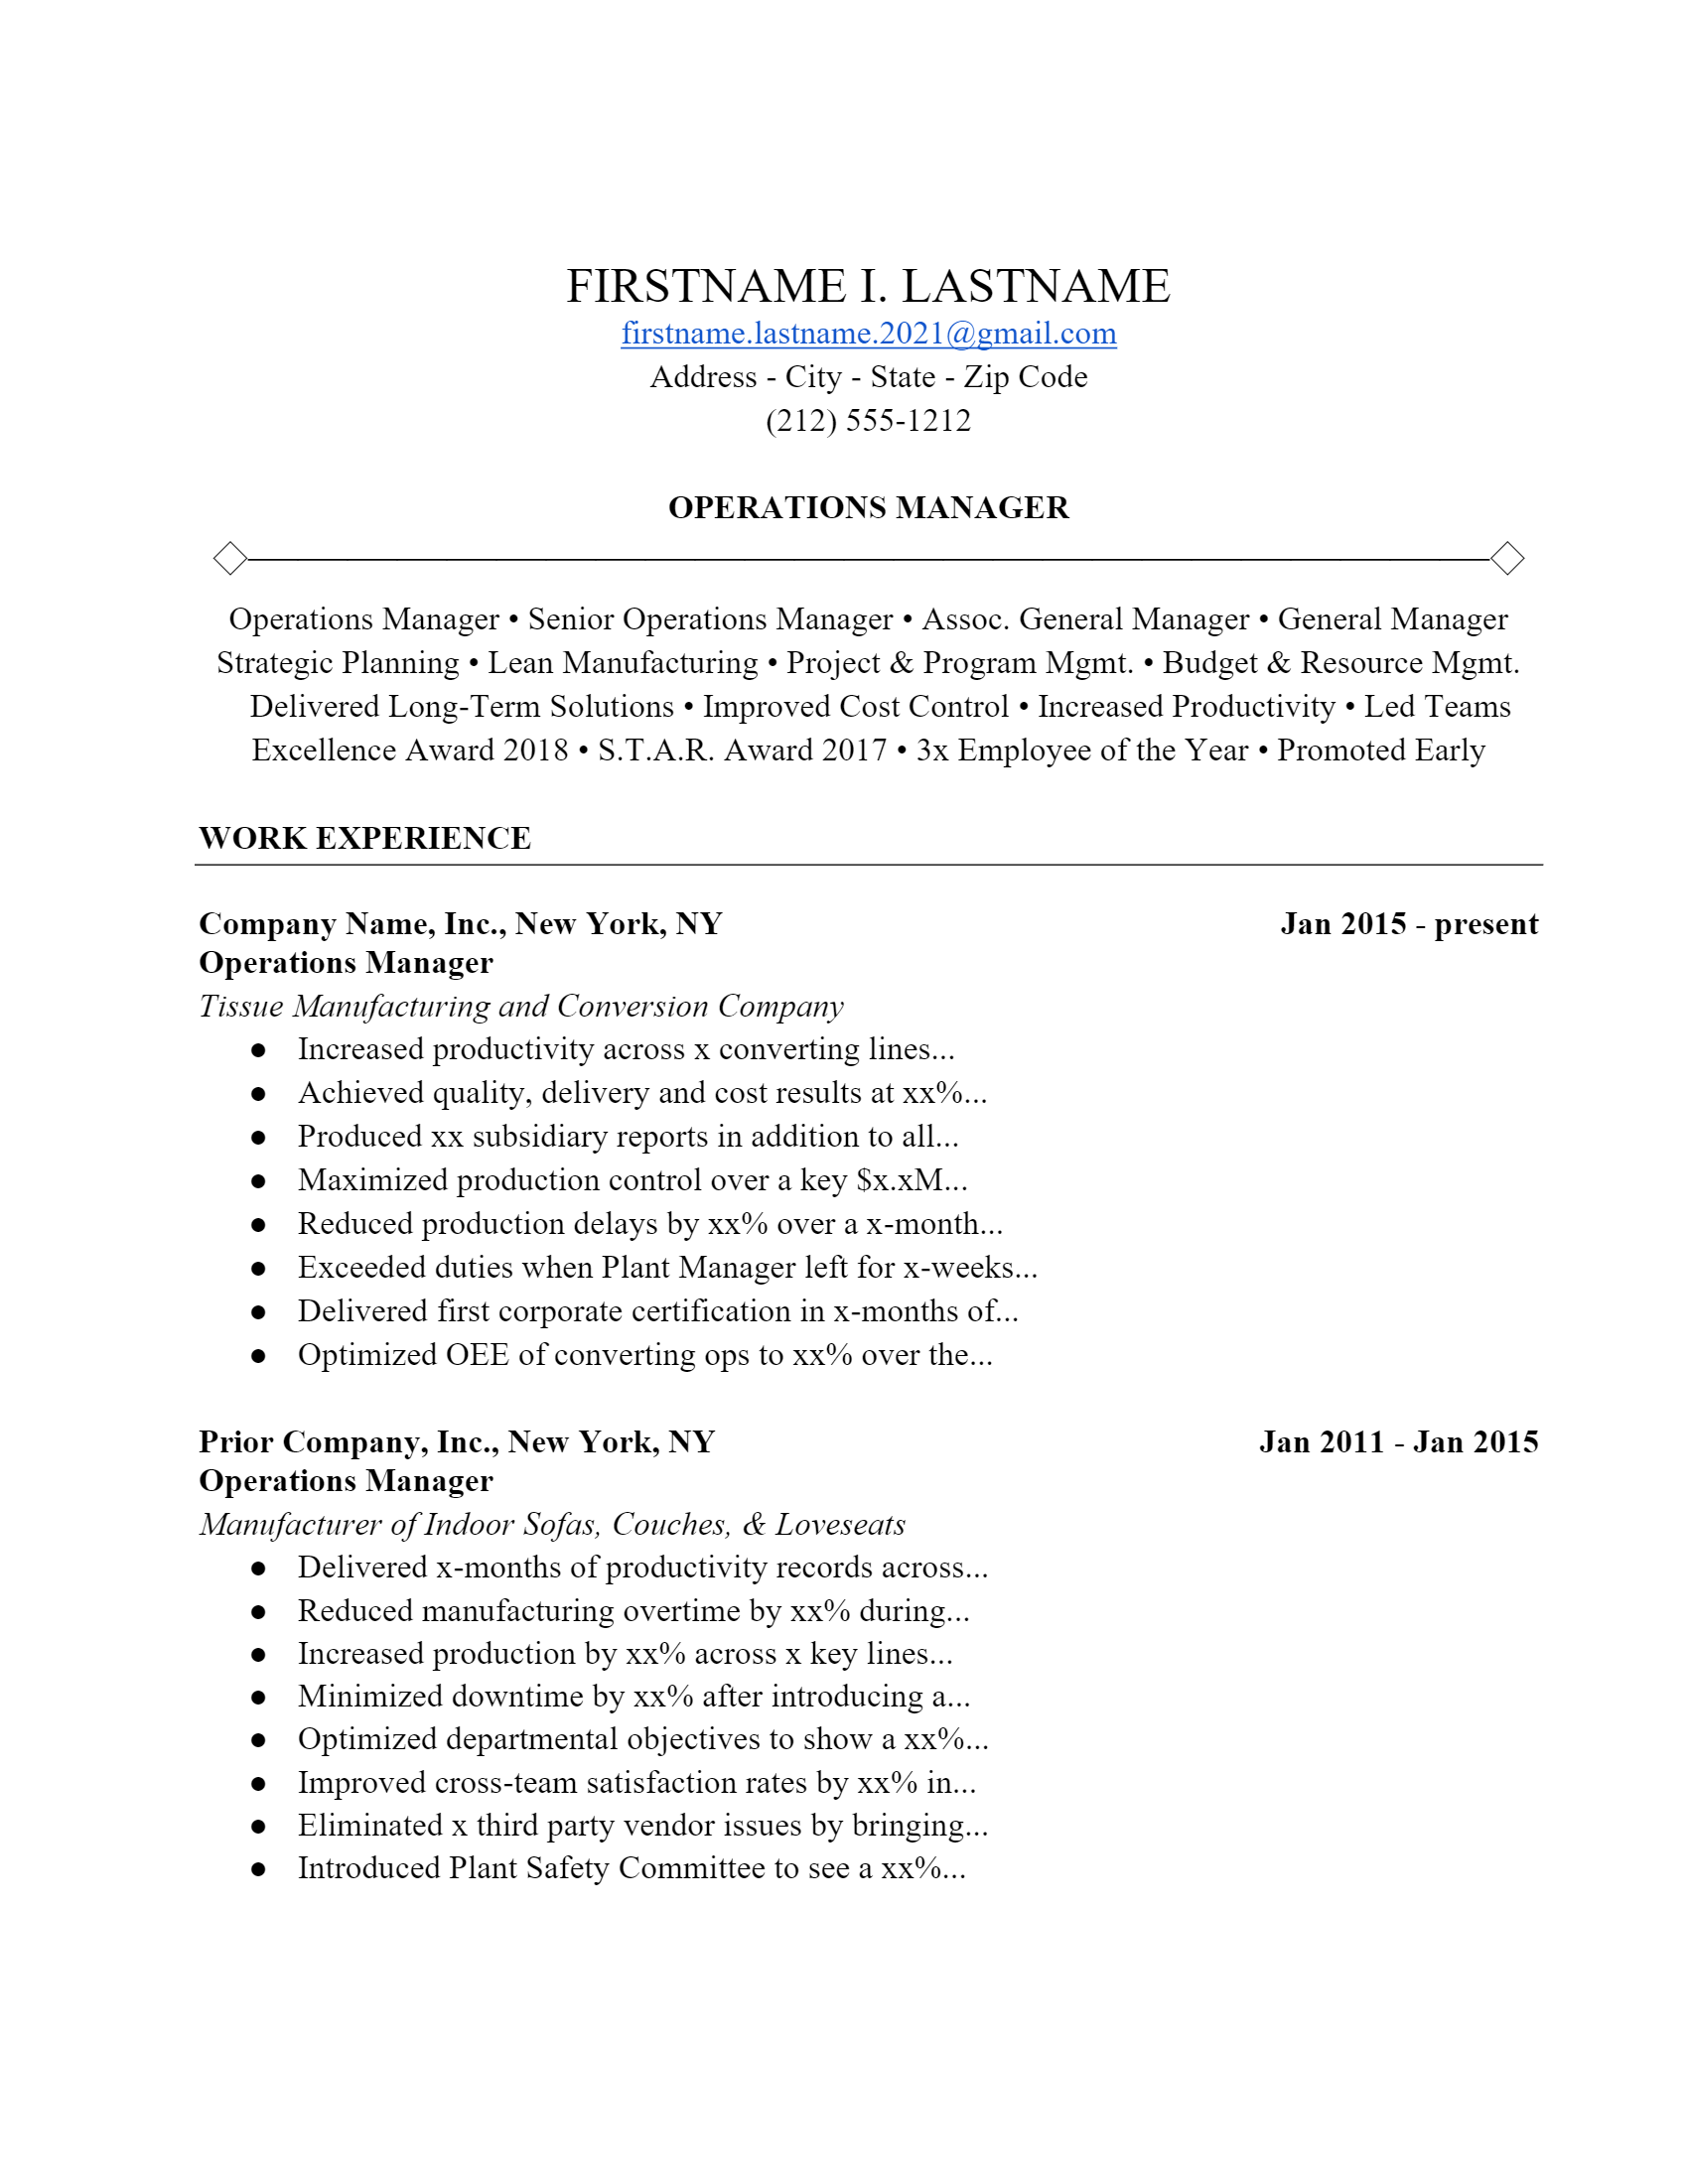 Operations Manager Resume .Docx (Word)